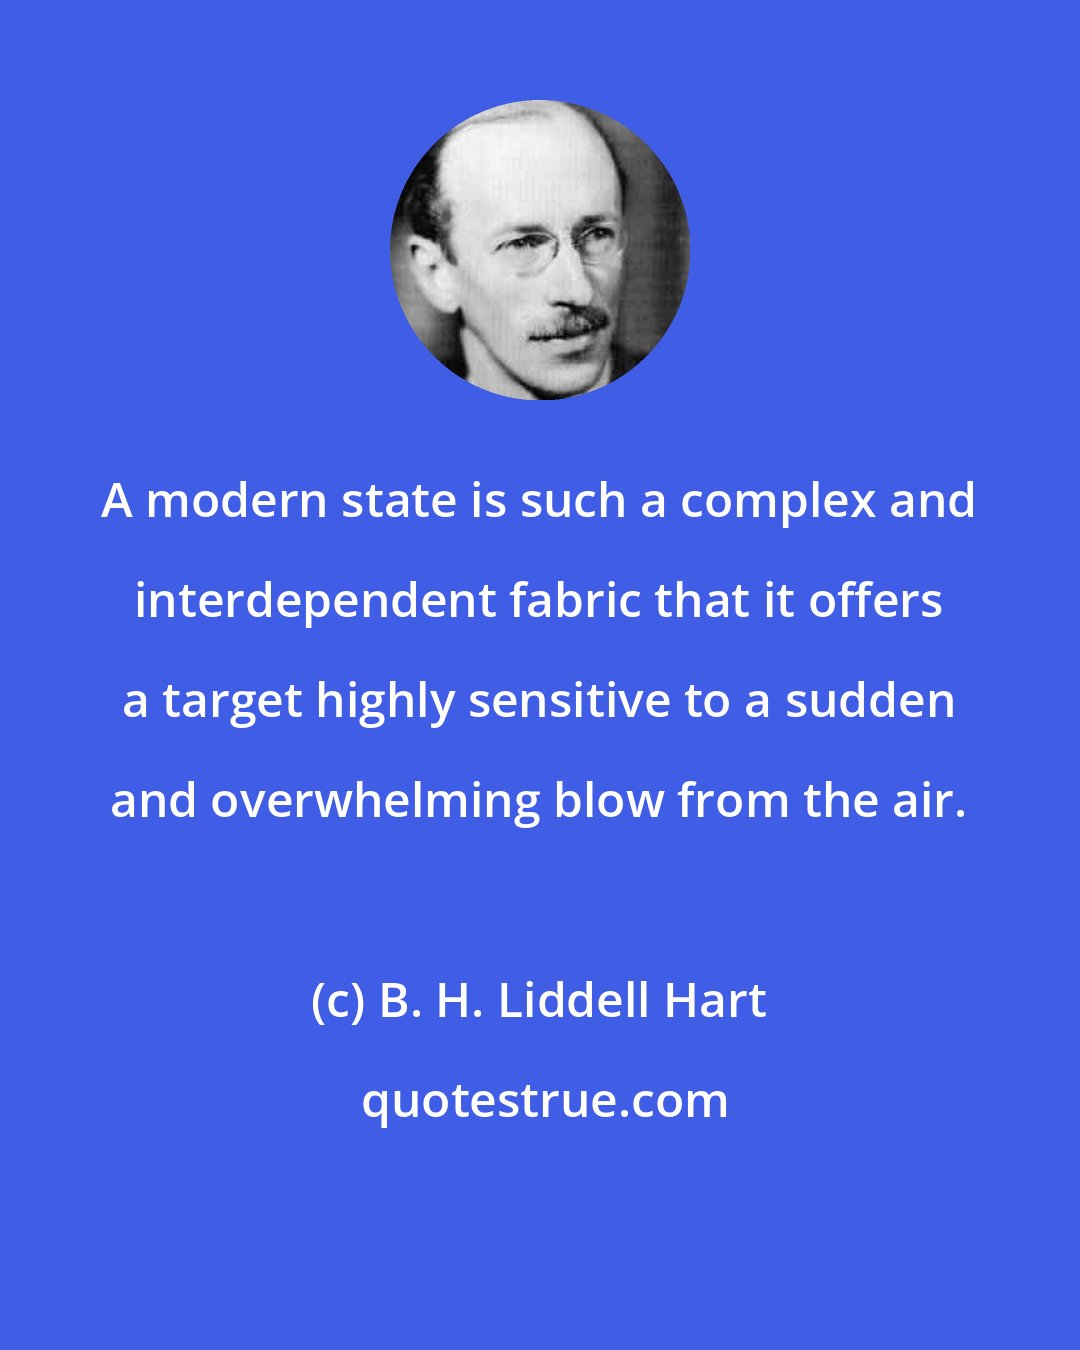 B. H. Liddell Hart: A modern state is such a complex and interdependent fabric that it offers a target highly sensitive to a sudden and overwhelming blow from the air.